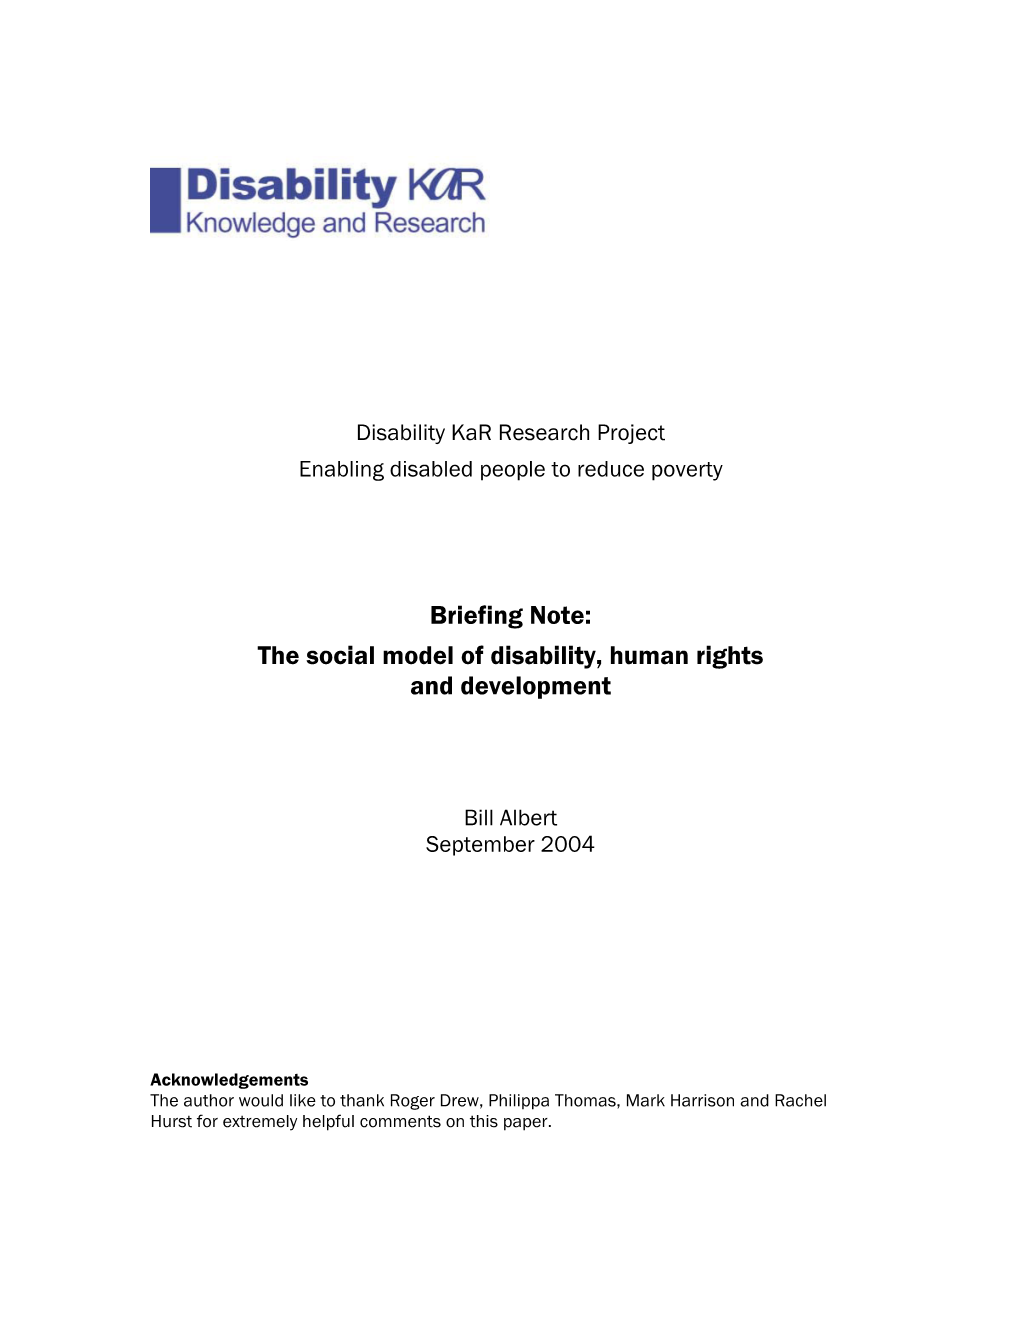 Disability and Development for EU Delegations and Services, EC DEV/RELEX/AIDCO and Delegations Staff Briefing Note